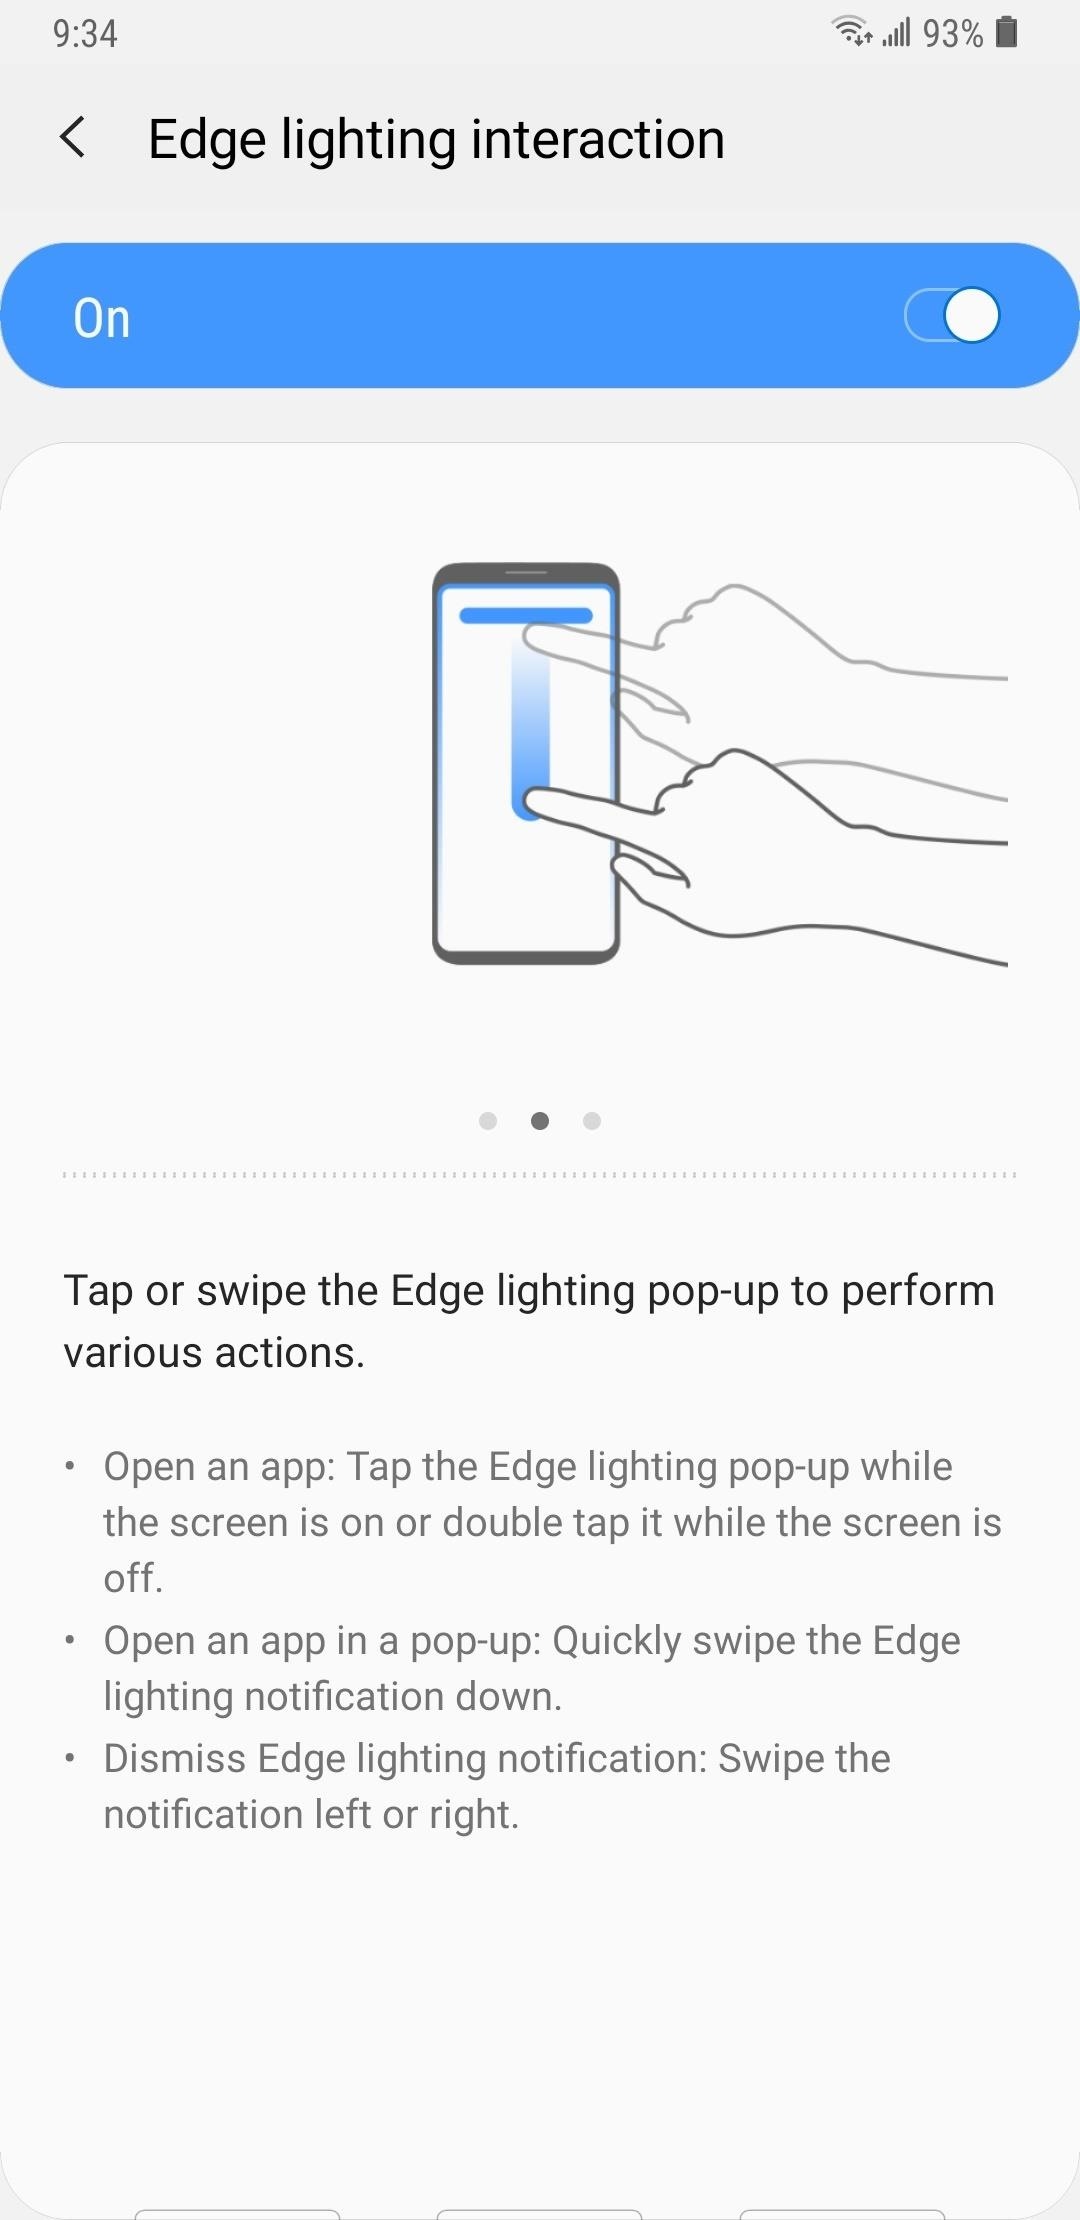 Samsung Android Pie Update: Galaxy Devices Are Getting Better Edge Lighting